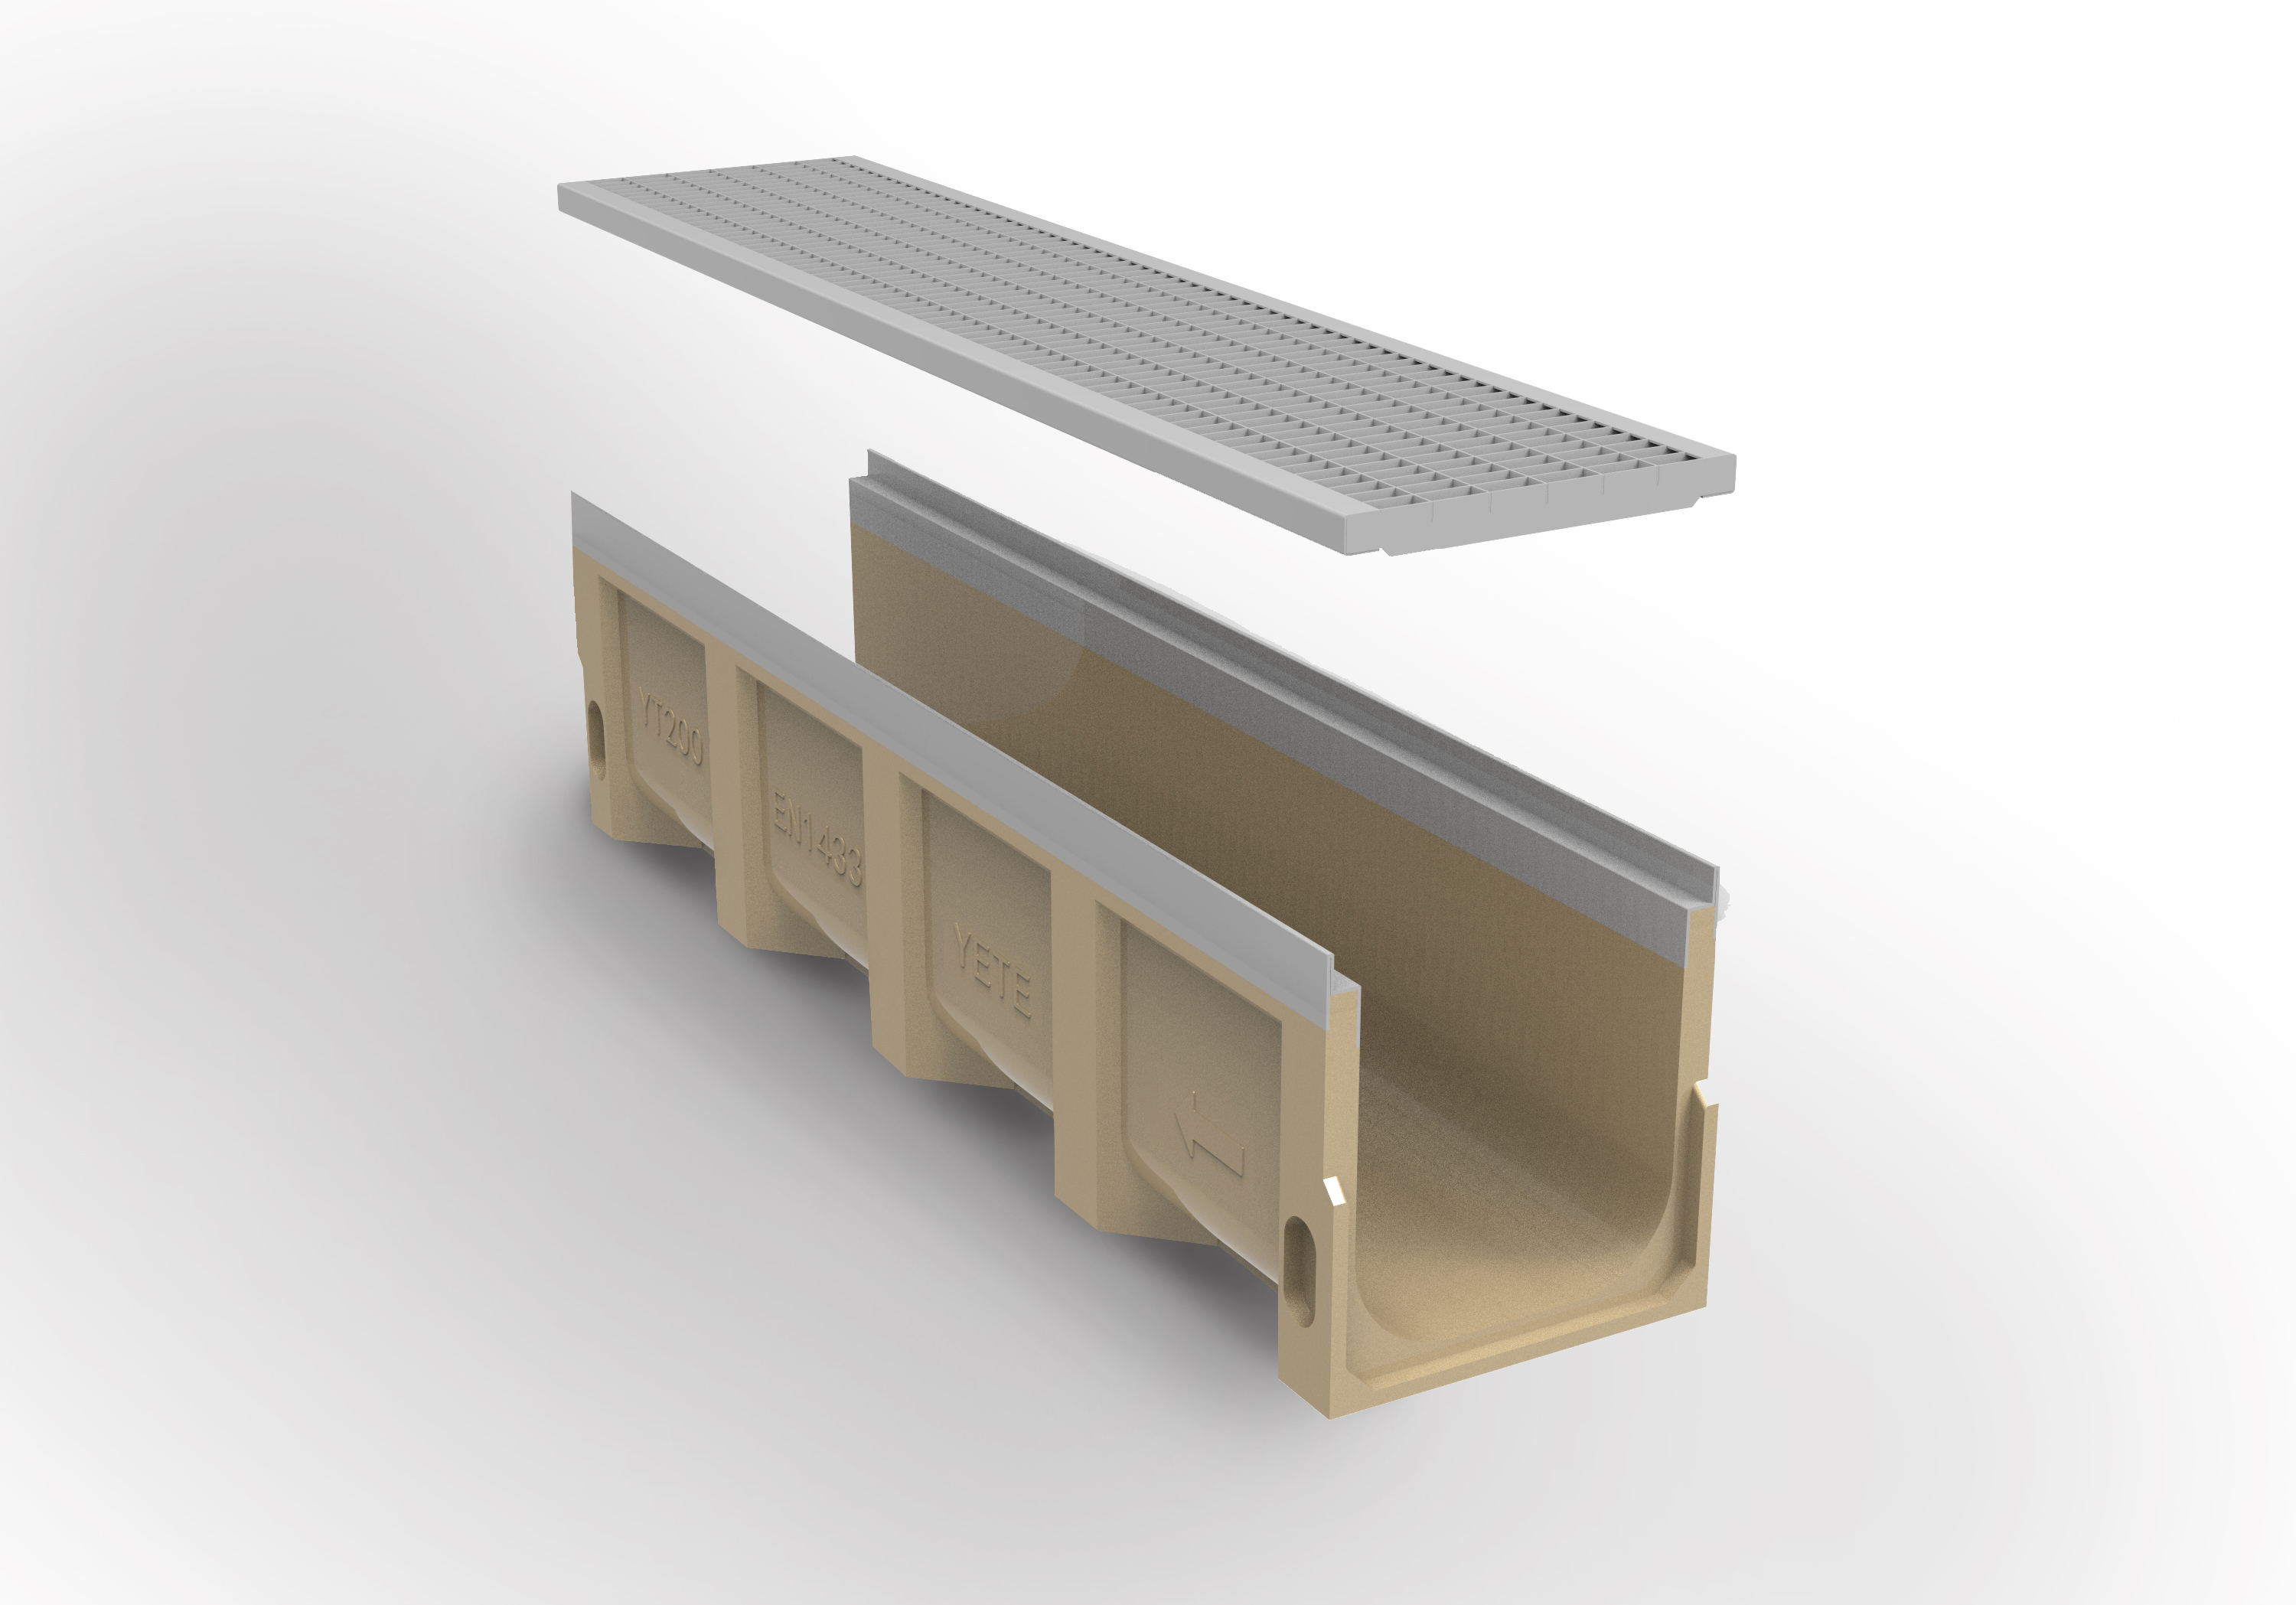 SS201 modern residential kerb drainage channel